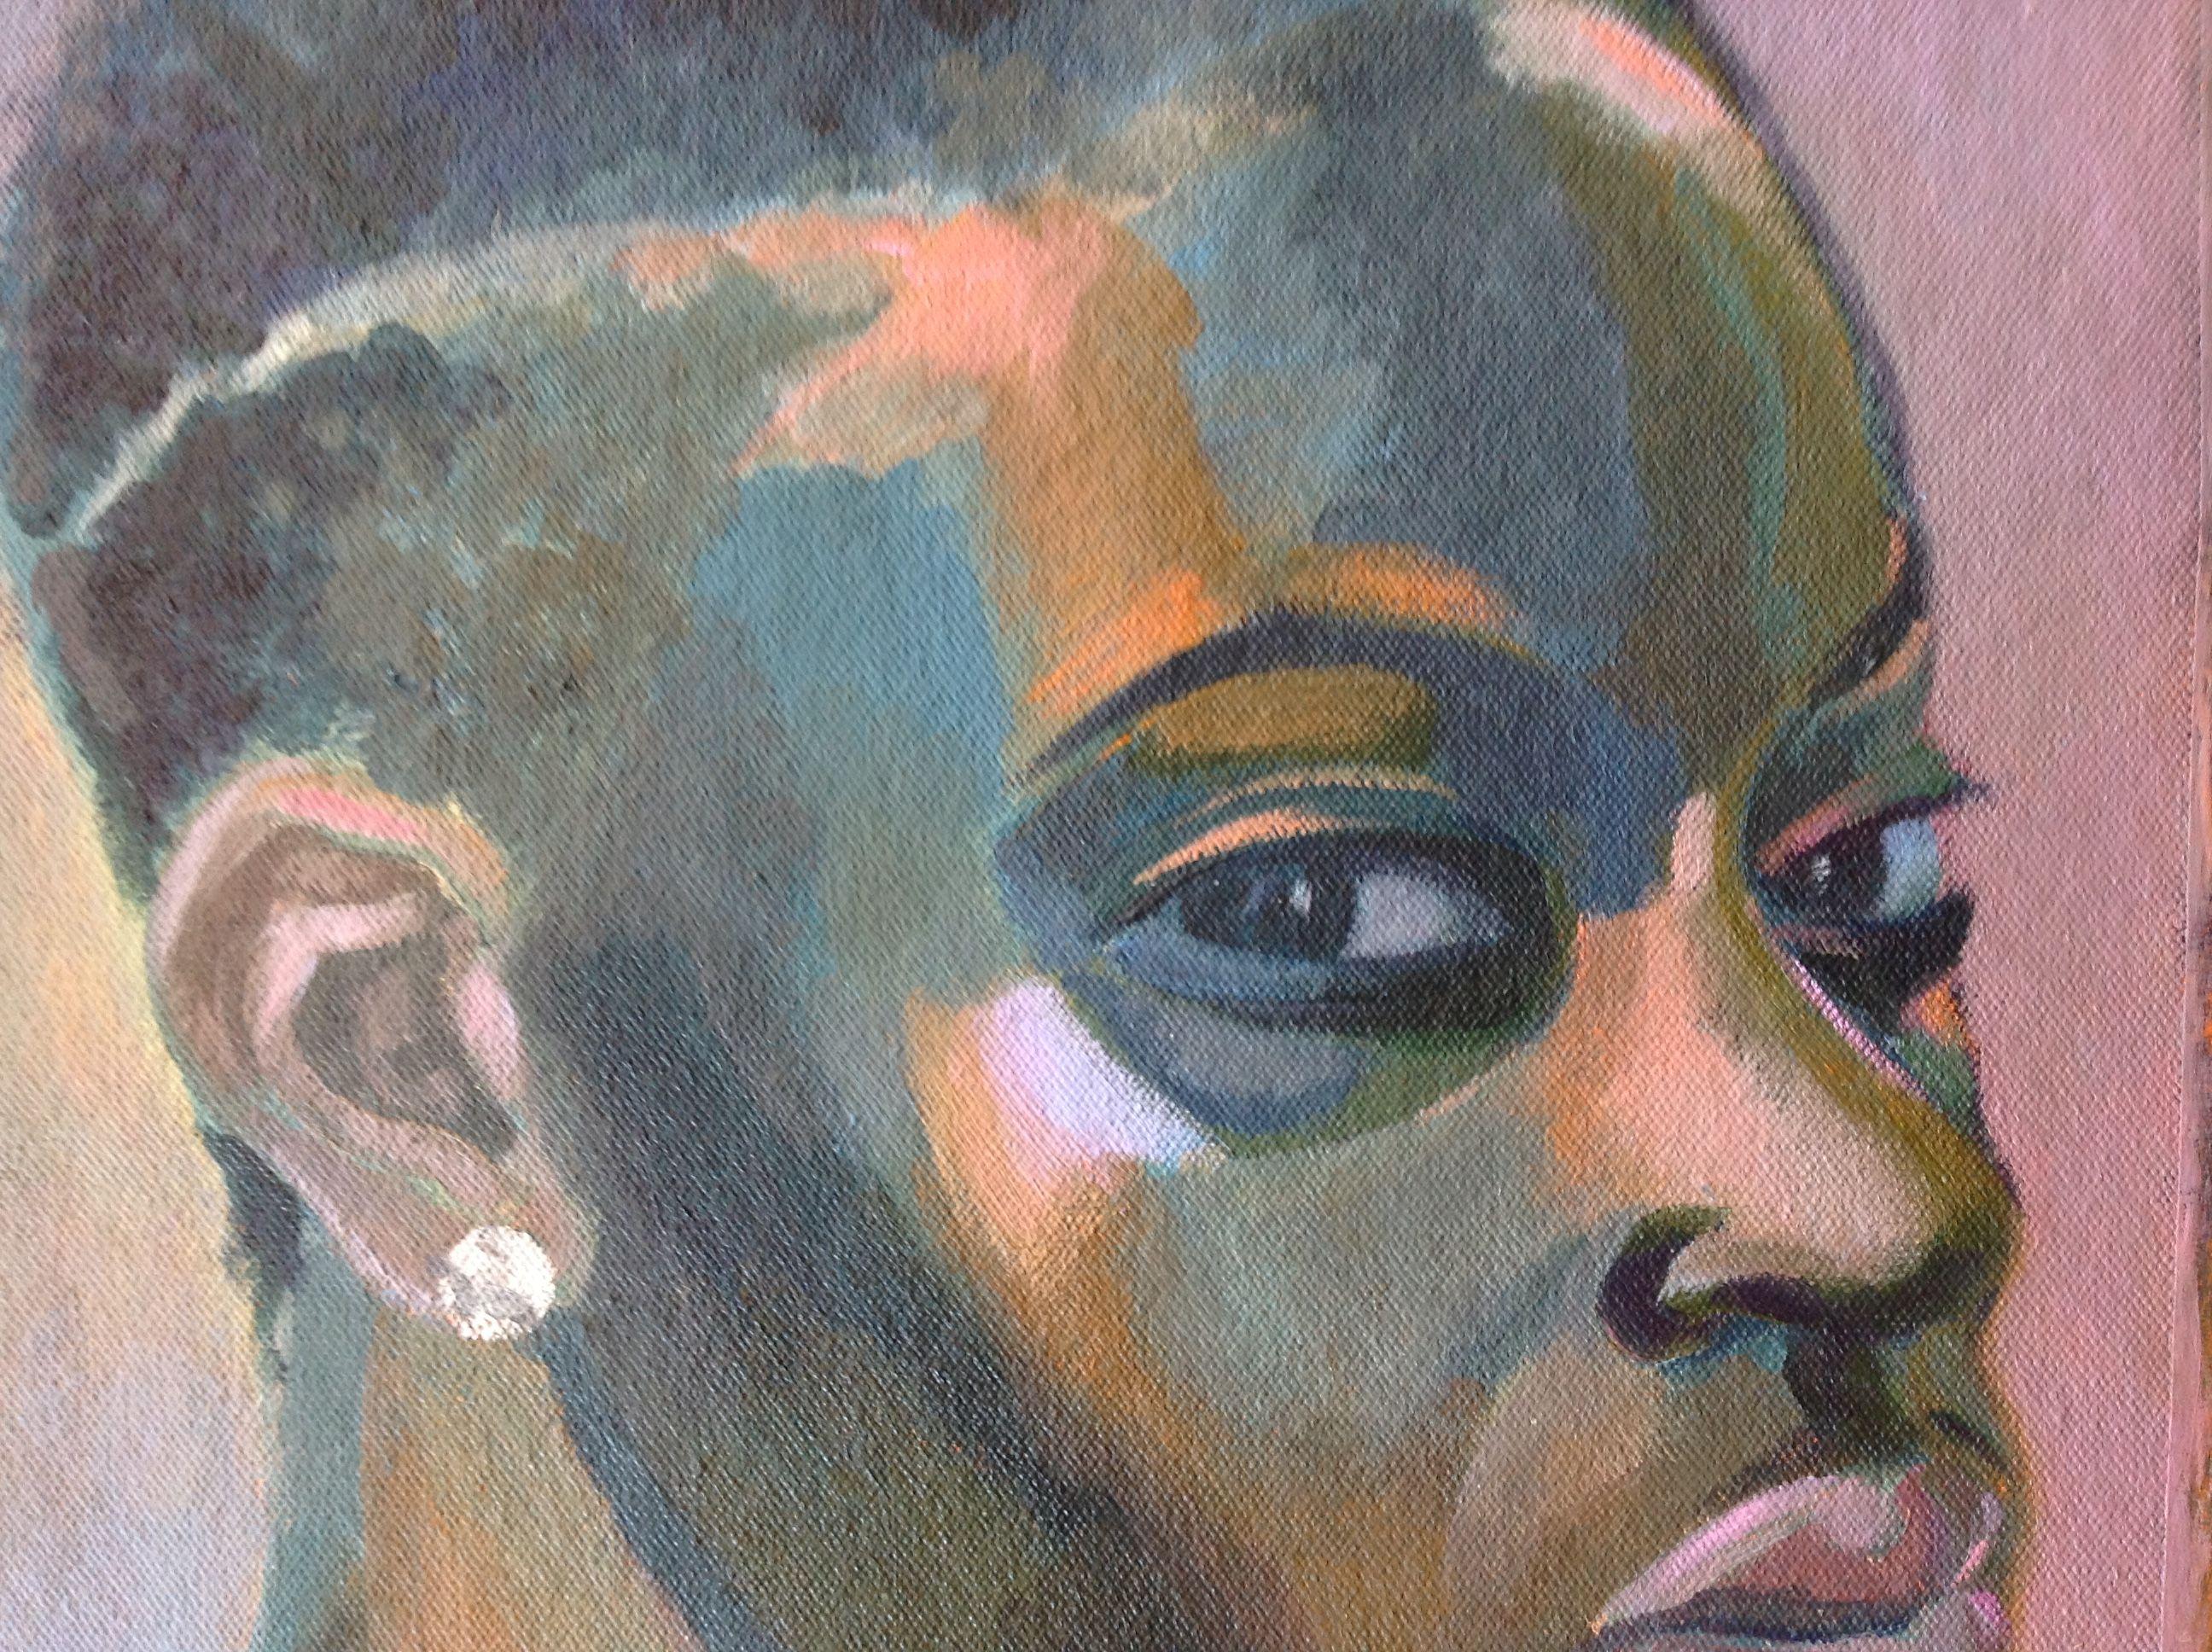 Acrylic work on unmounted canvas.  Represents a young black woman in profile. Her name is Marcia and she has become one of my favourite models. :: Painting :: Expressionism :: This piece comes with an official certificate of authenticity signed by